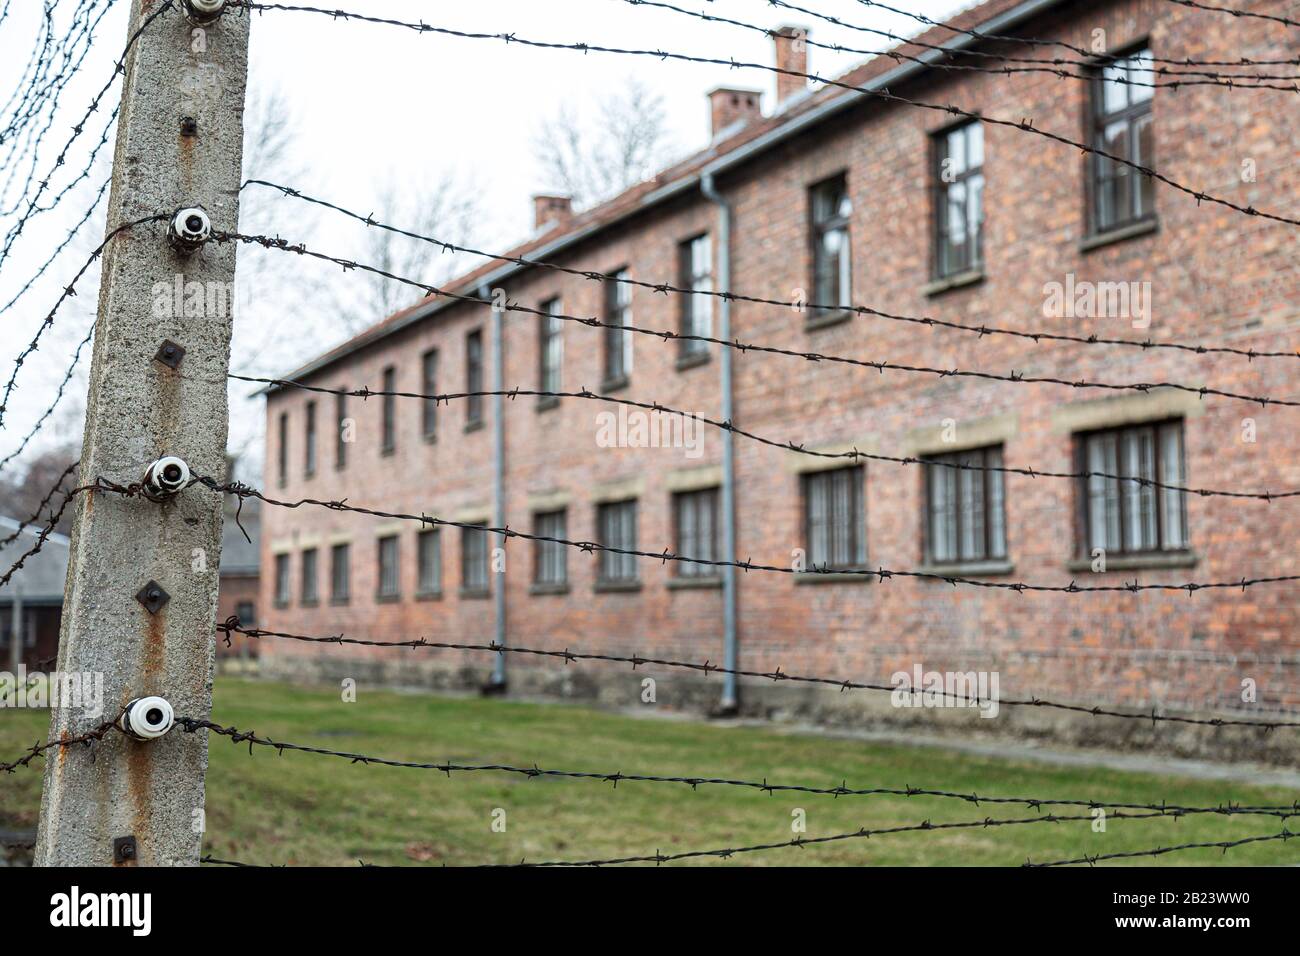 Remains of buildings at Auschwitz - Birkenau Museum and Memorial of the Nazi Death Camps of World War II Stock Photo